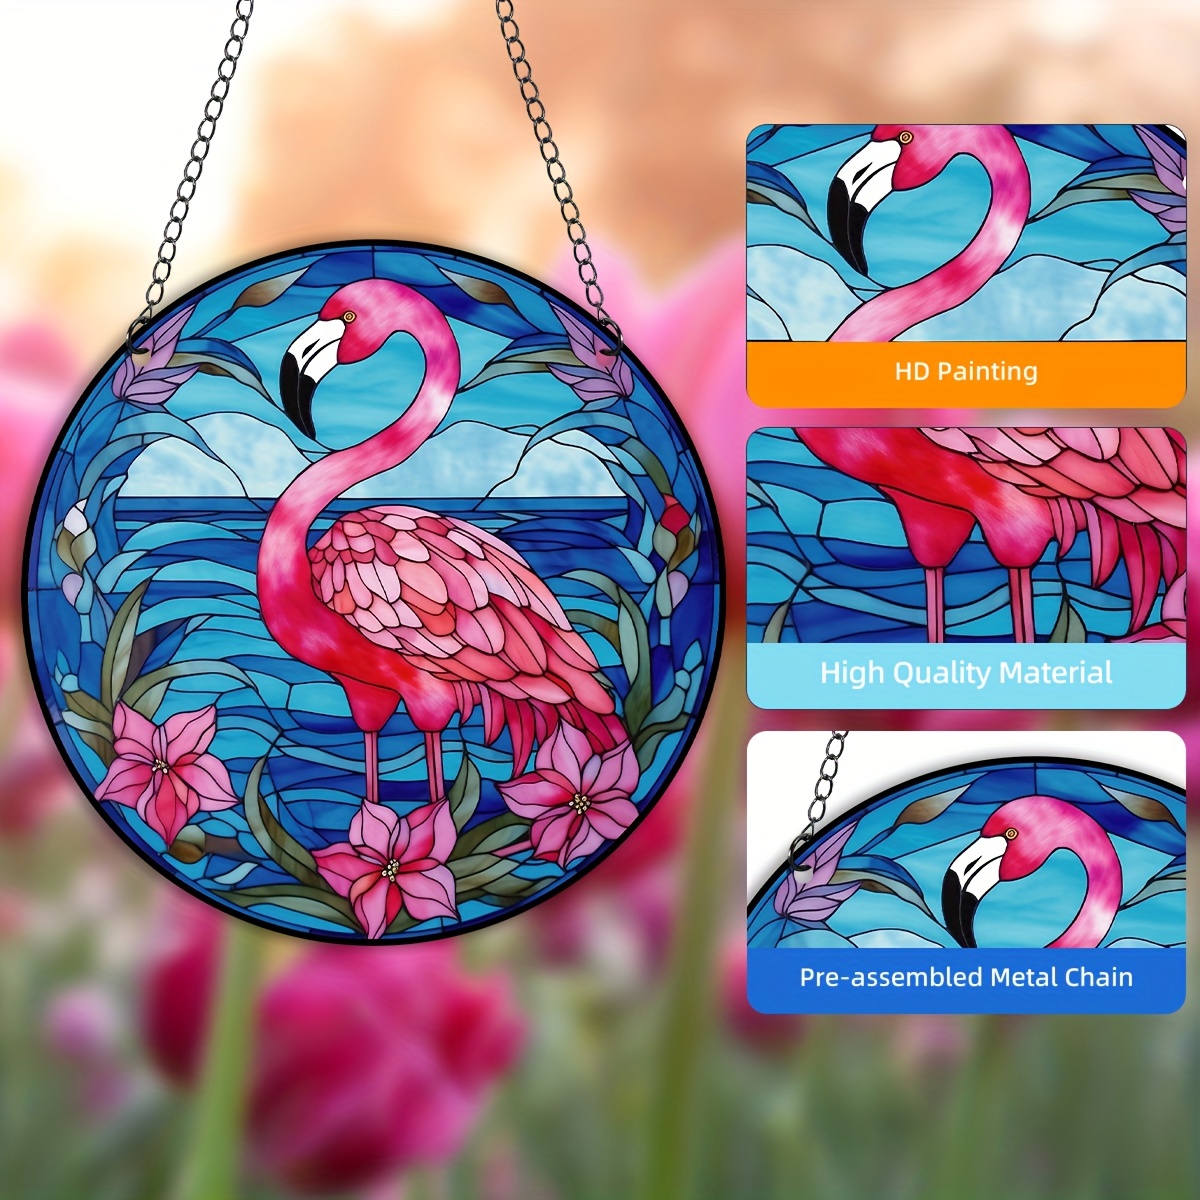 Flamingo Stained Glass Pattern - Set of 2 - Living Sun Glass